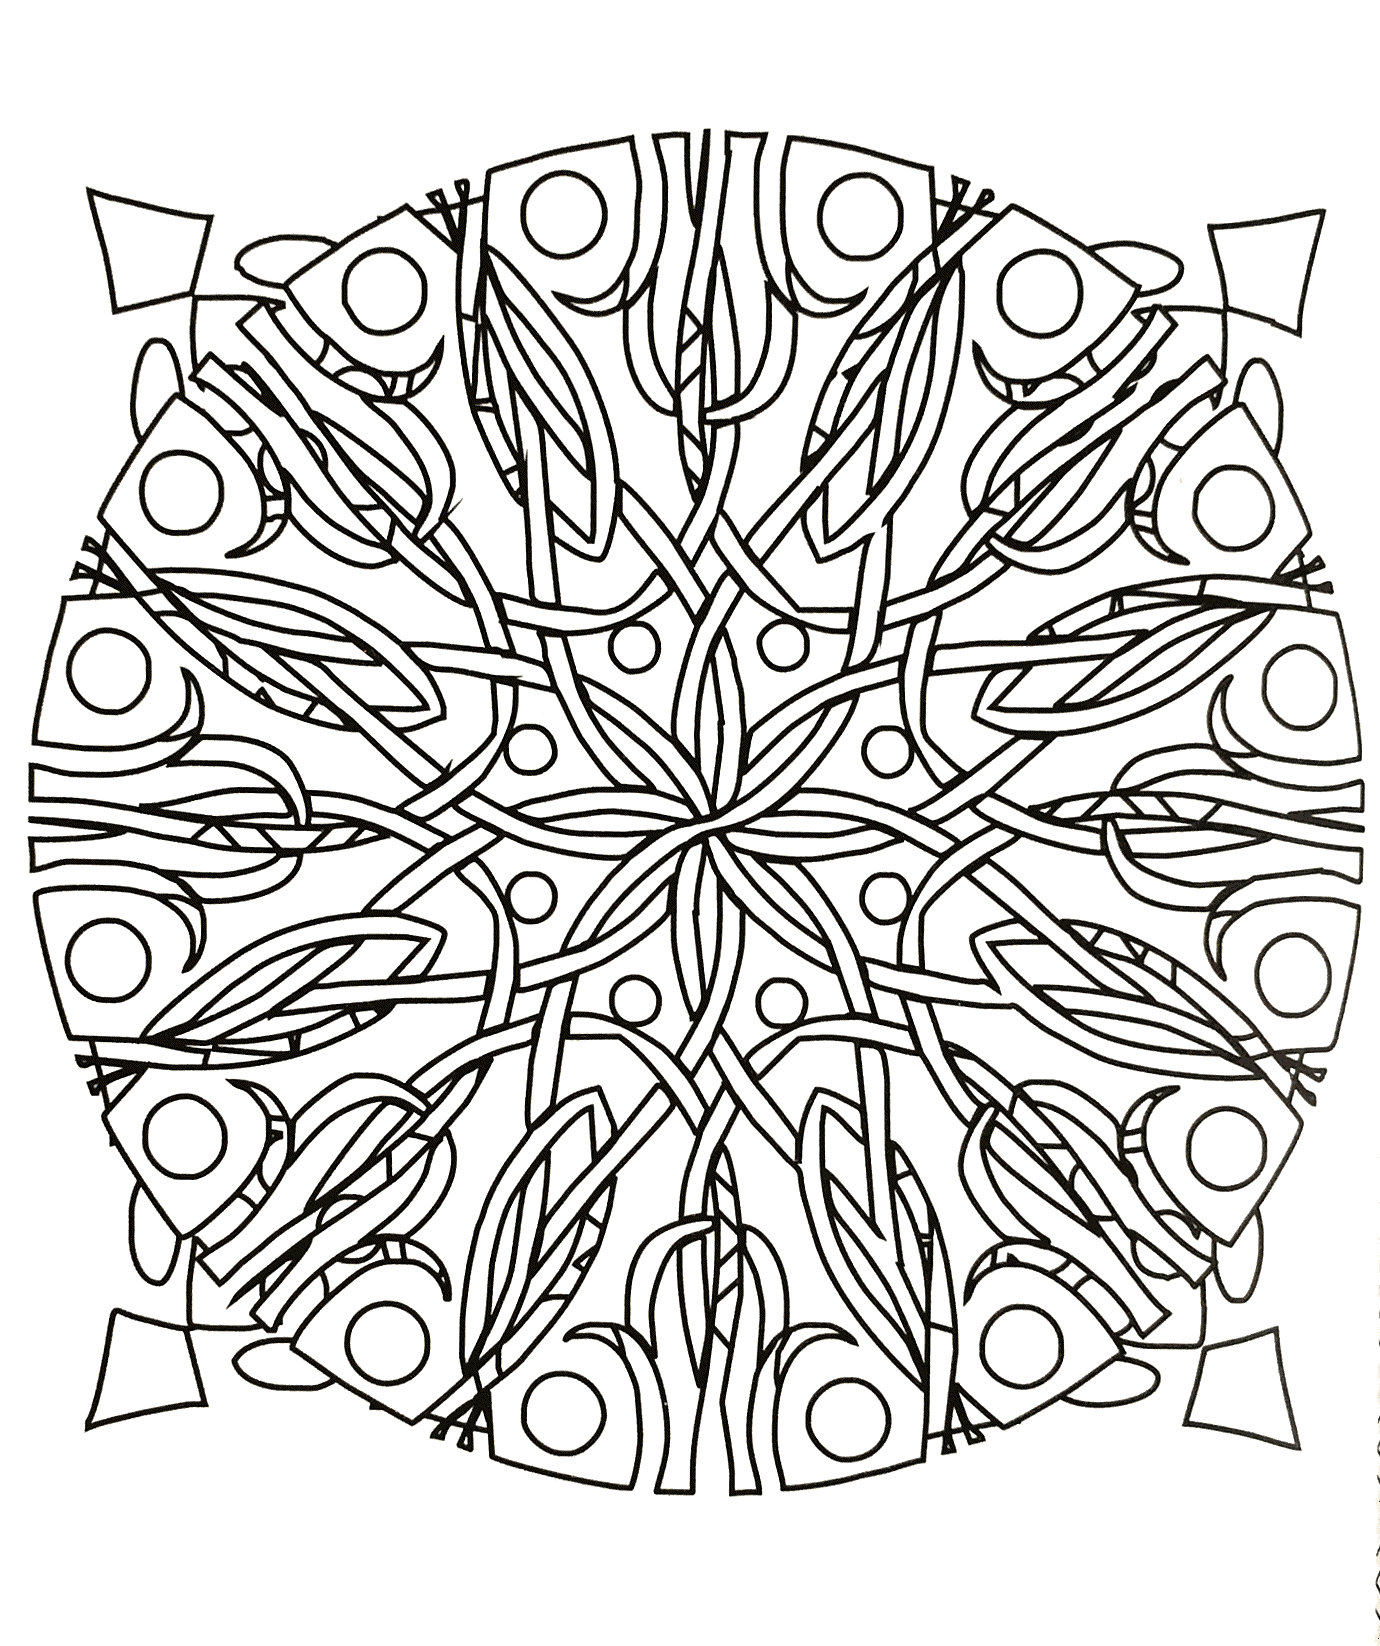 Prepare your pens and pencils to color this cool Coloring page full of small details and intricate areas. Feel free to let your instincts decide where to color in this beautiful Mandala, and what colors to choose.